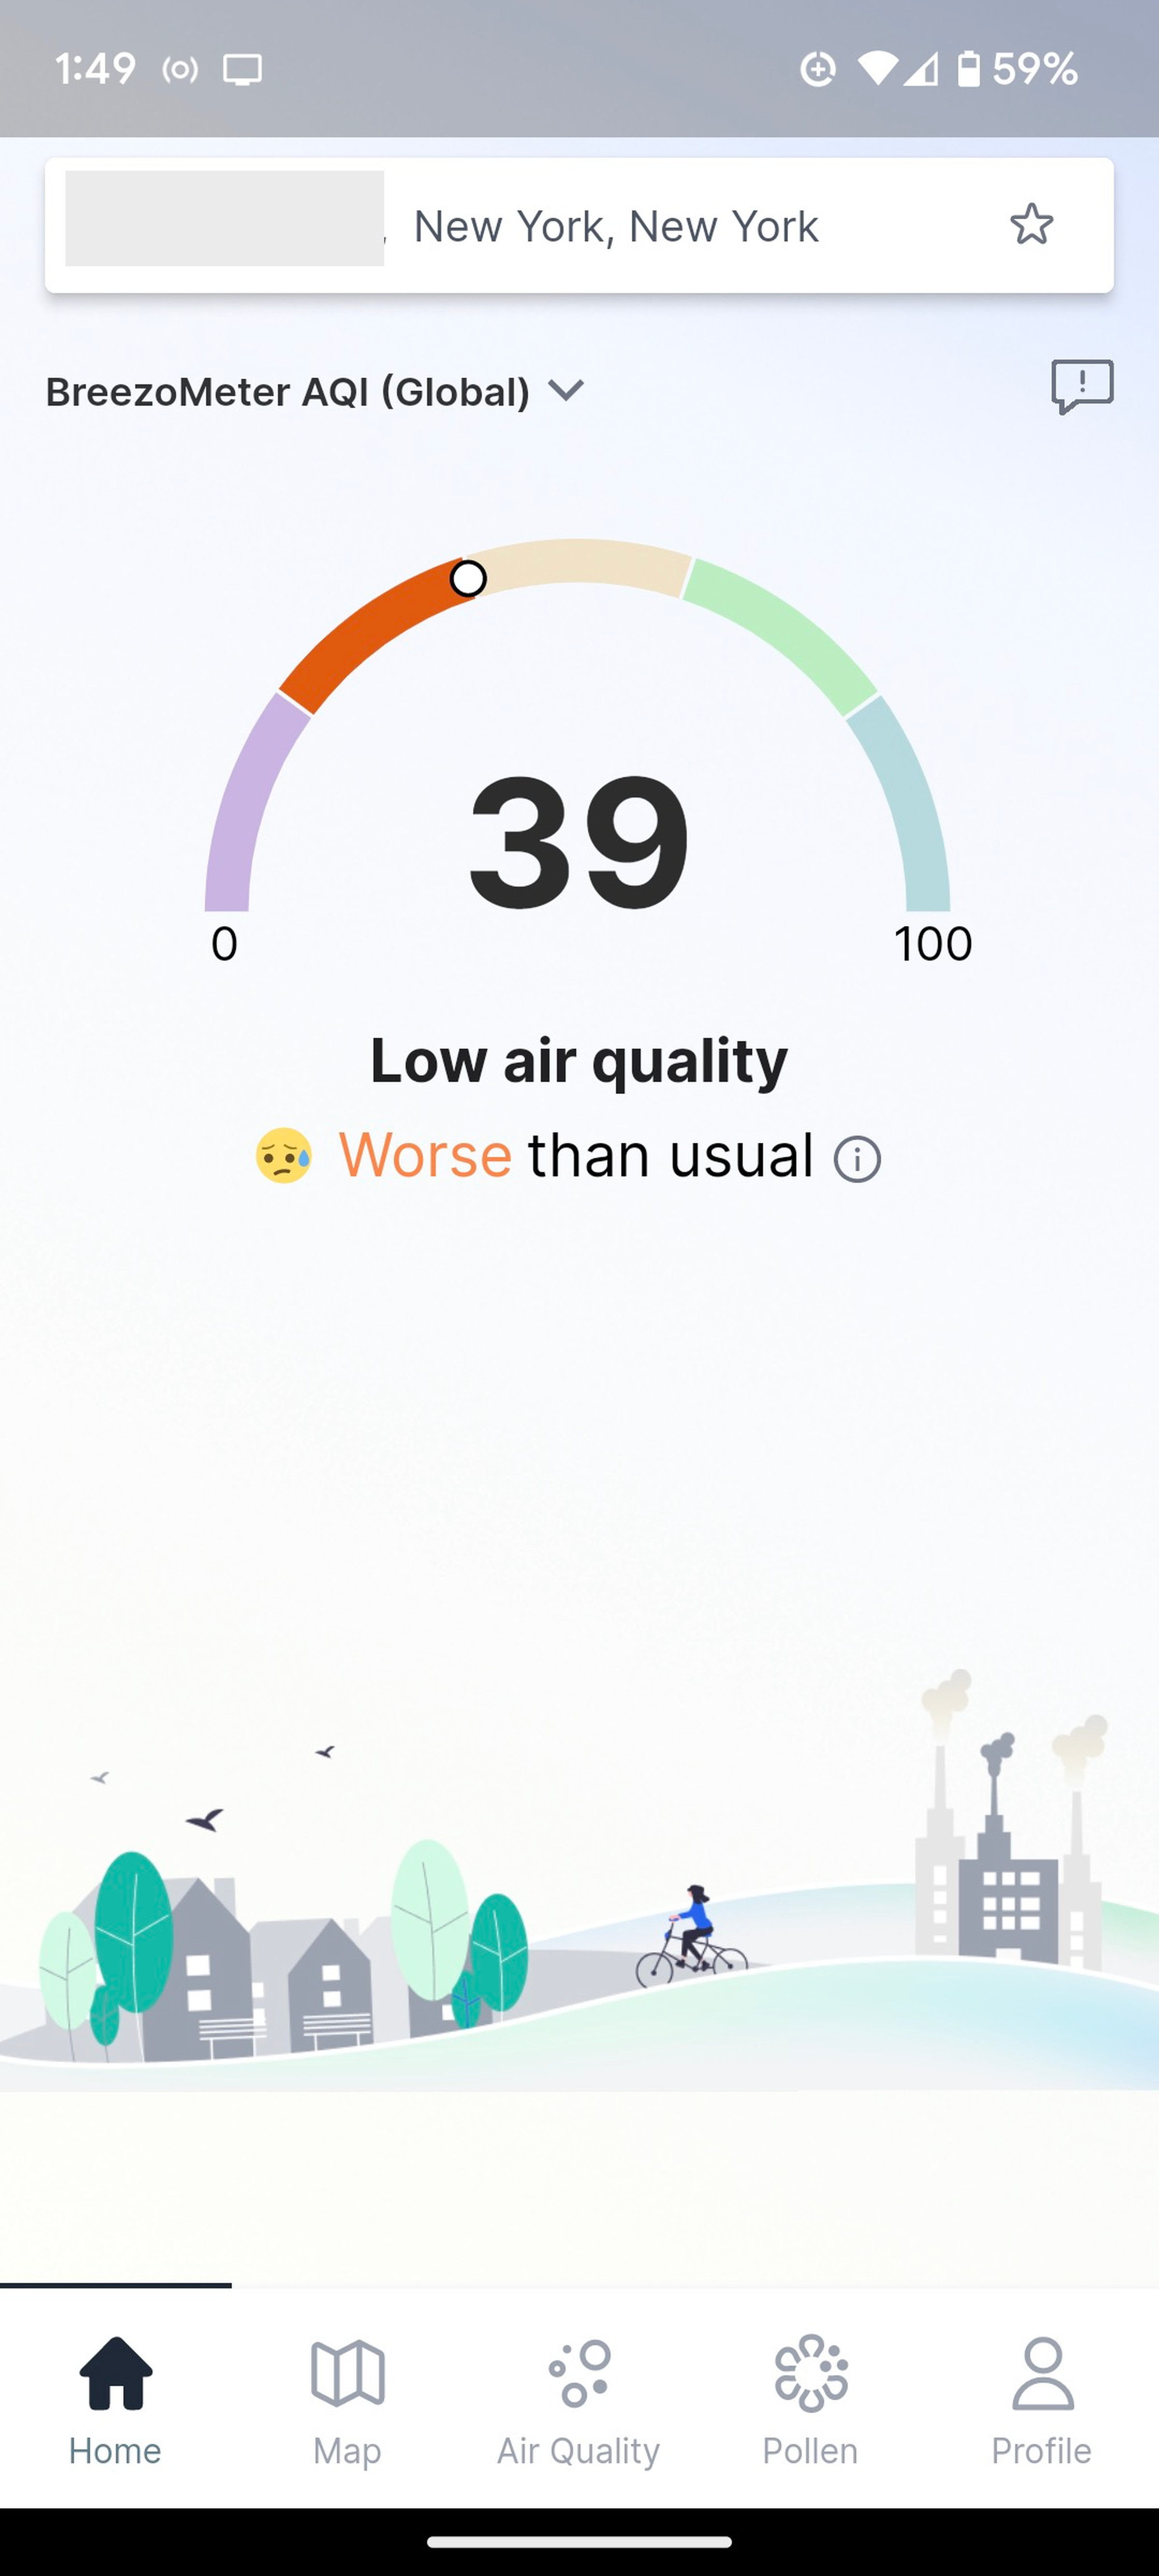 Mobile screen with half-circle showing a 39 rating in the center and the words “Low air quality / Worse than usual” and a drawing of a suburb with factories below that.